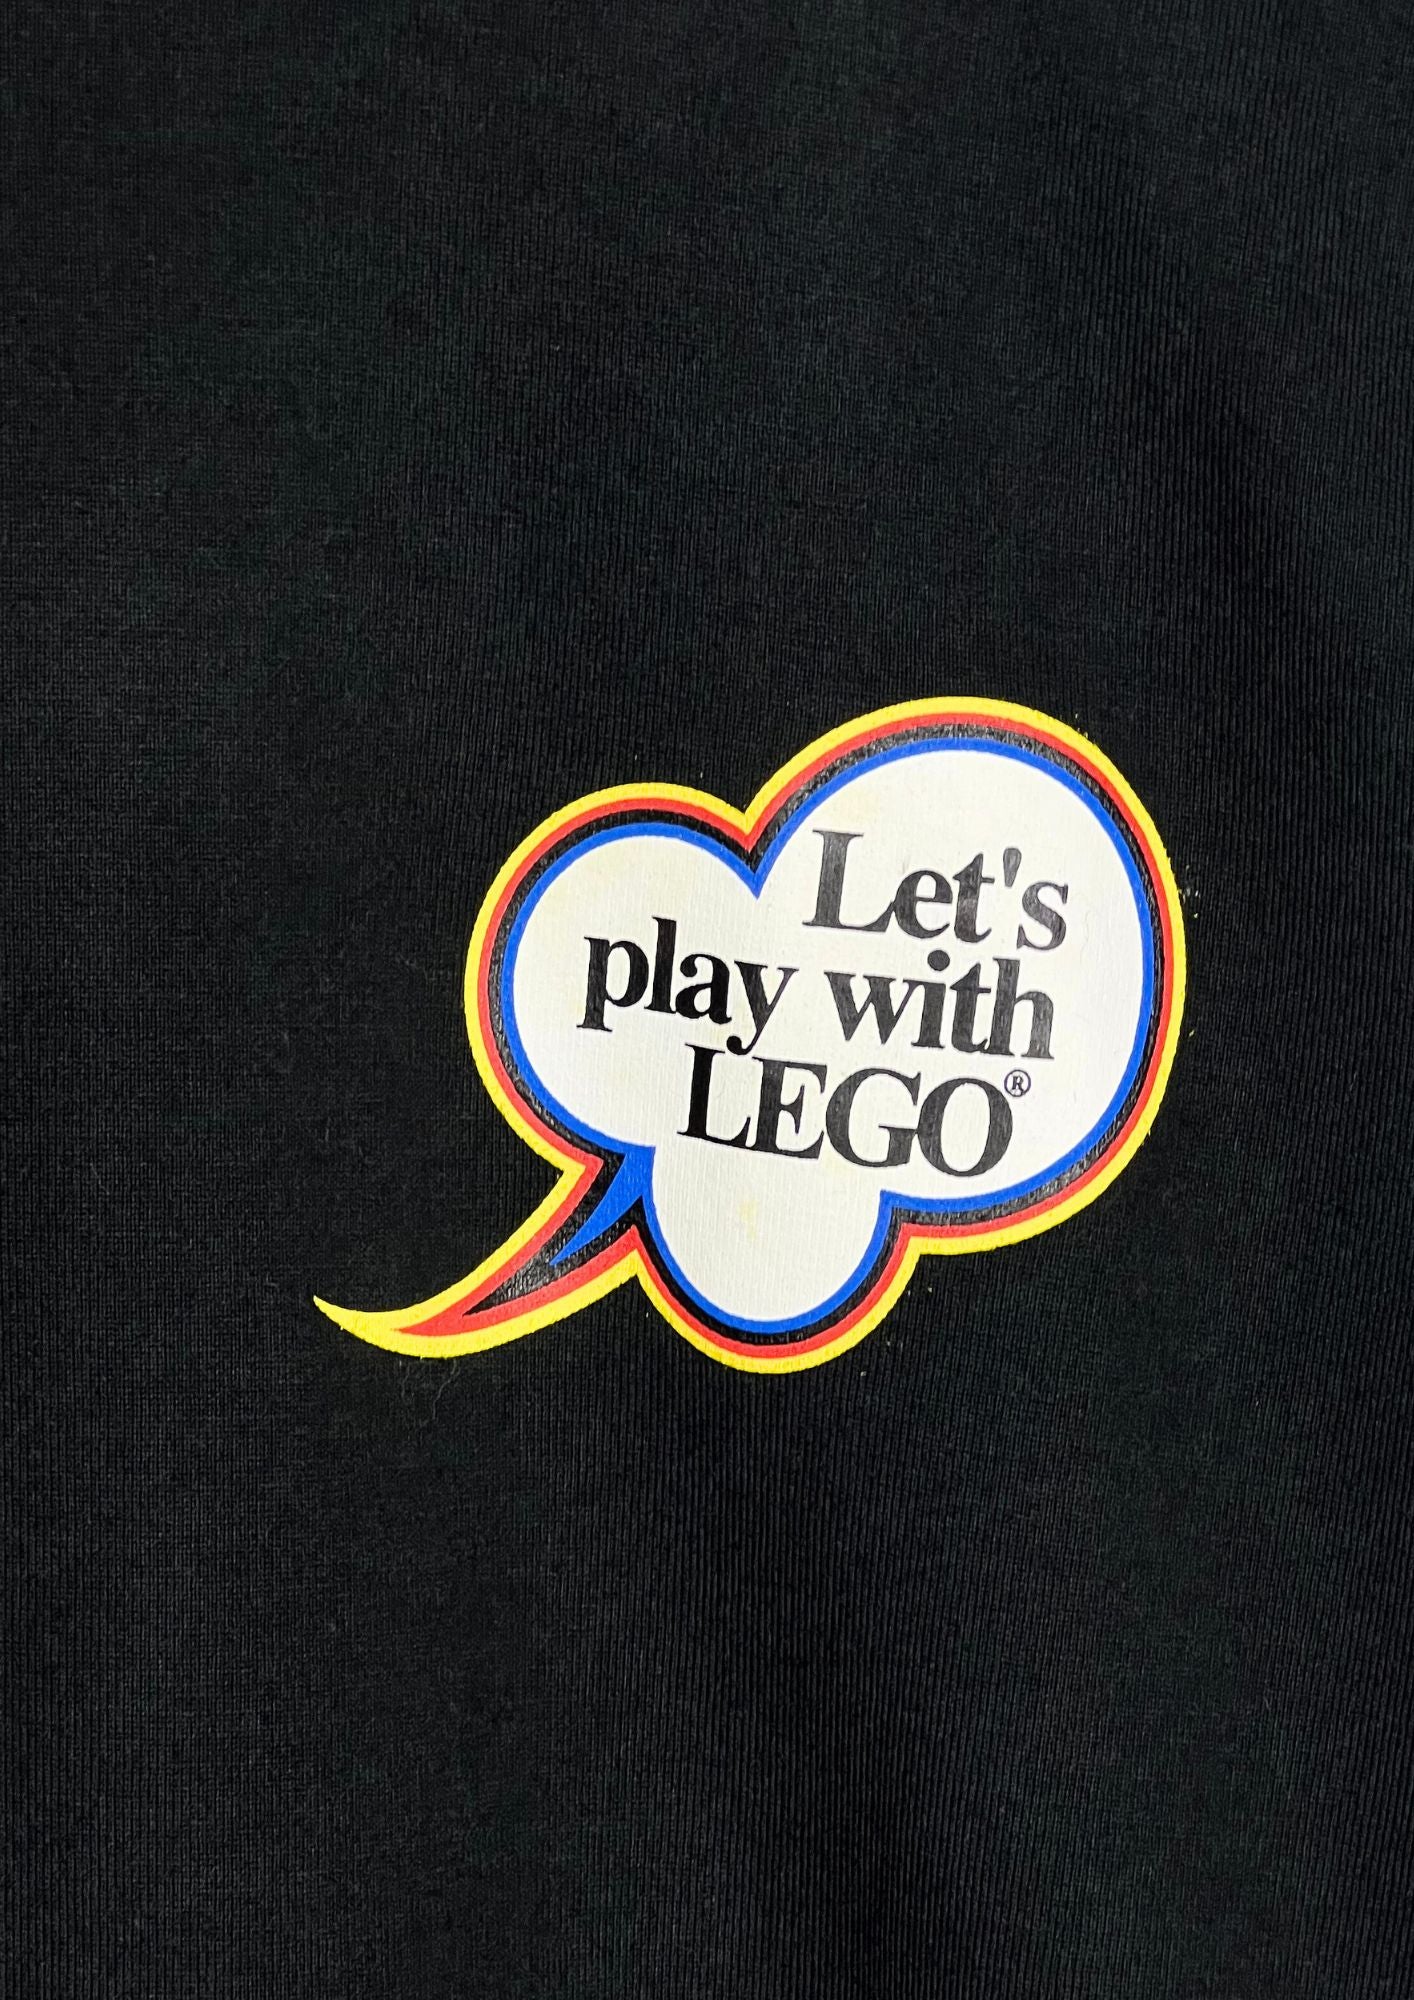 2002 Taiyo Matsumoto x LEGO Let's play with LEGO T-shirt